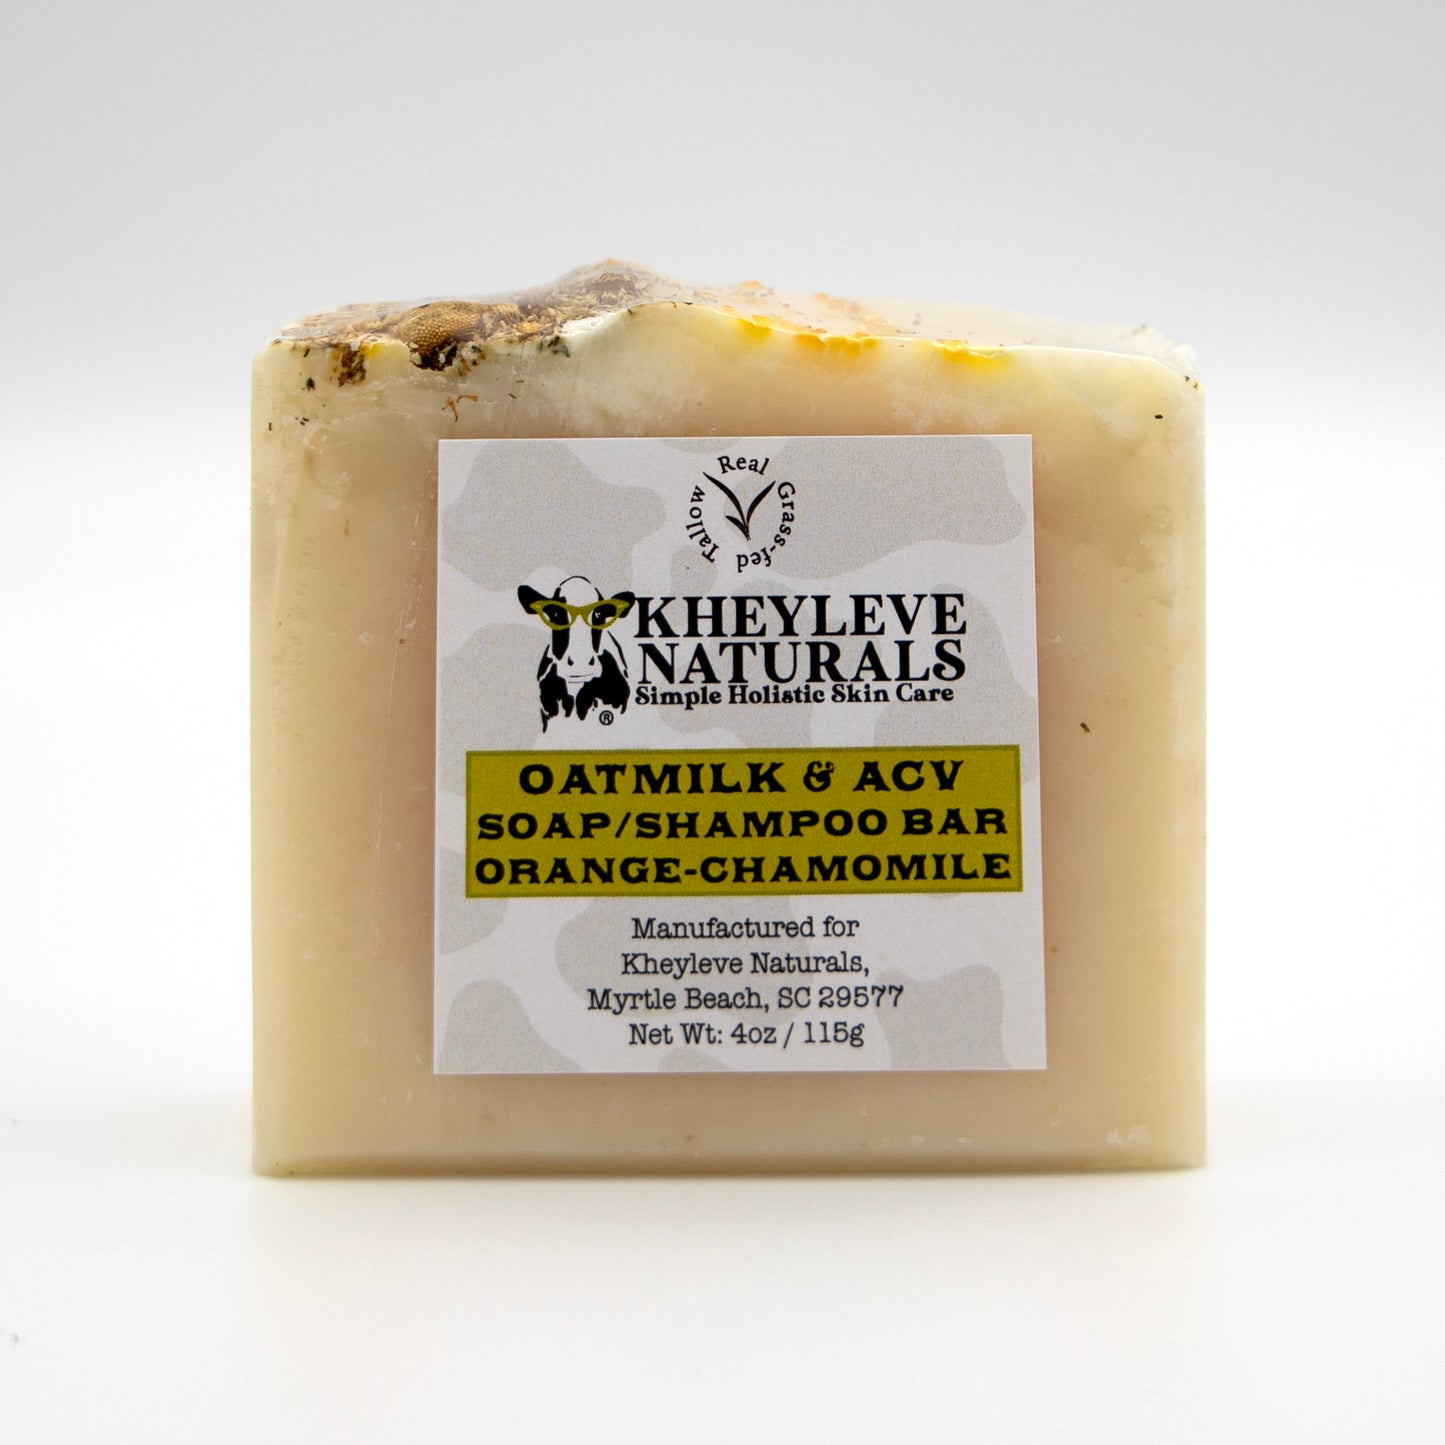 This all natural  Shampoo/ Soap bar is packed with the soothing power of chamomile and the refreshing zing of orange. Revive your hair with the natural, vinegar-infused chamomile formula, perfect for sensitive scalps.